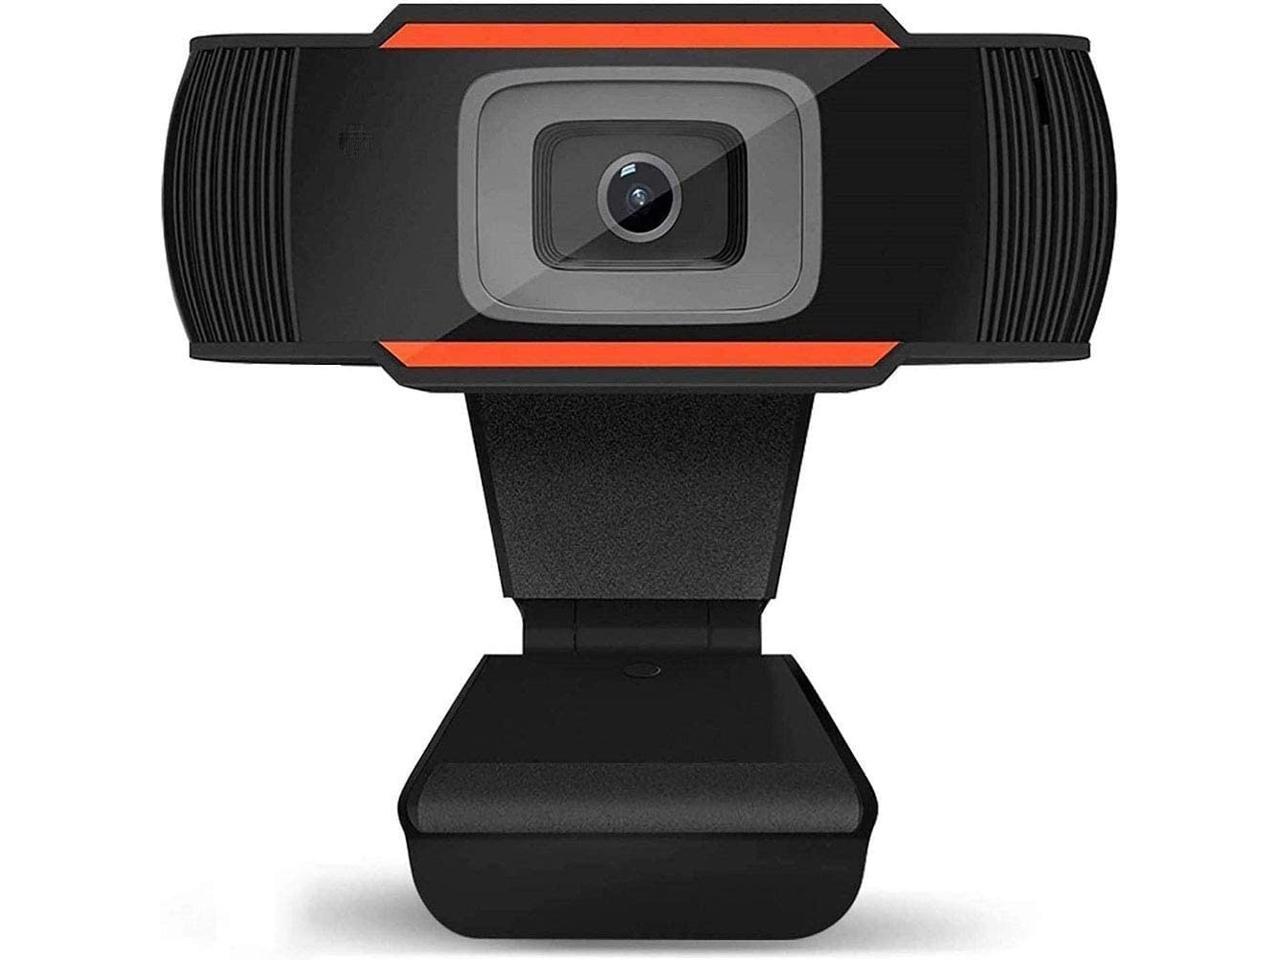 Professional Webcam,Webcam with Microphone for Desktop, HD Streaming USB Computer PC Camera with Auto Light Correction for Video Calling and Recording